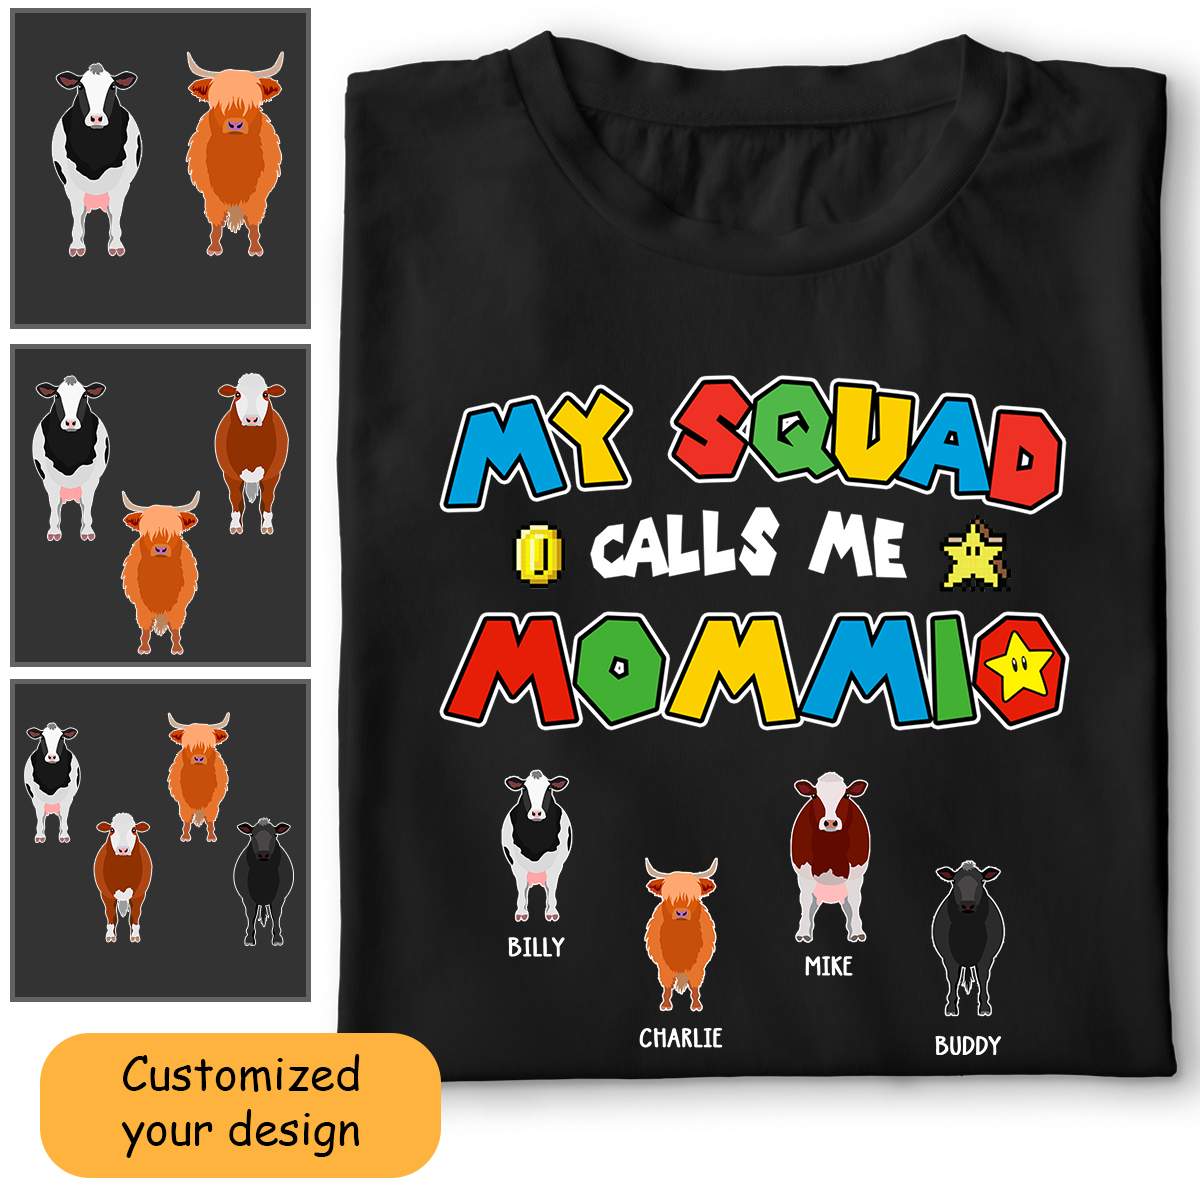 Customized Cattle Cow Mom Shirt My Squad Calls Me Mommio For Mom, Mother, Grandma, Wife, Farmer, Mother's Day Gift, For Cow Lovers